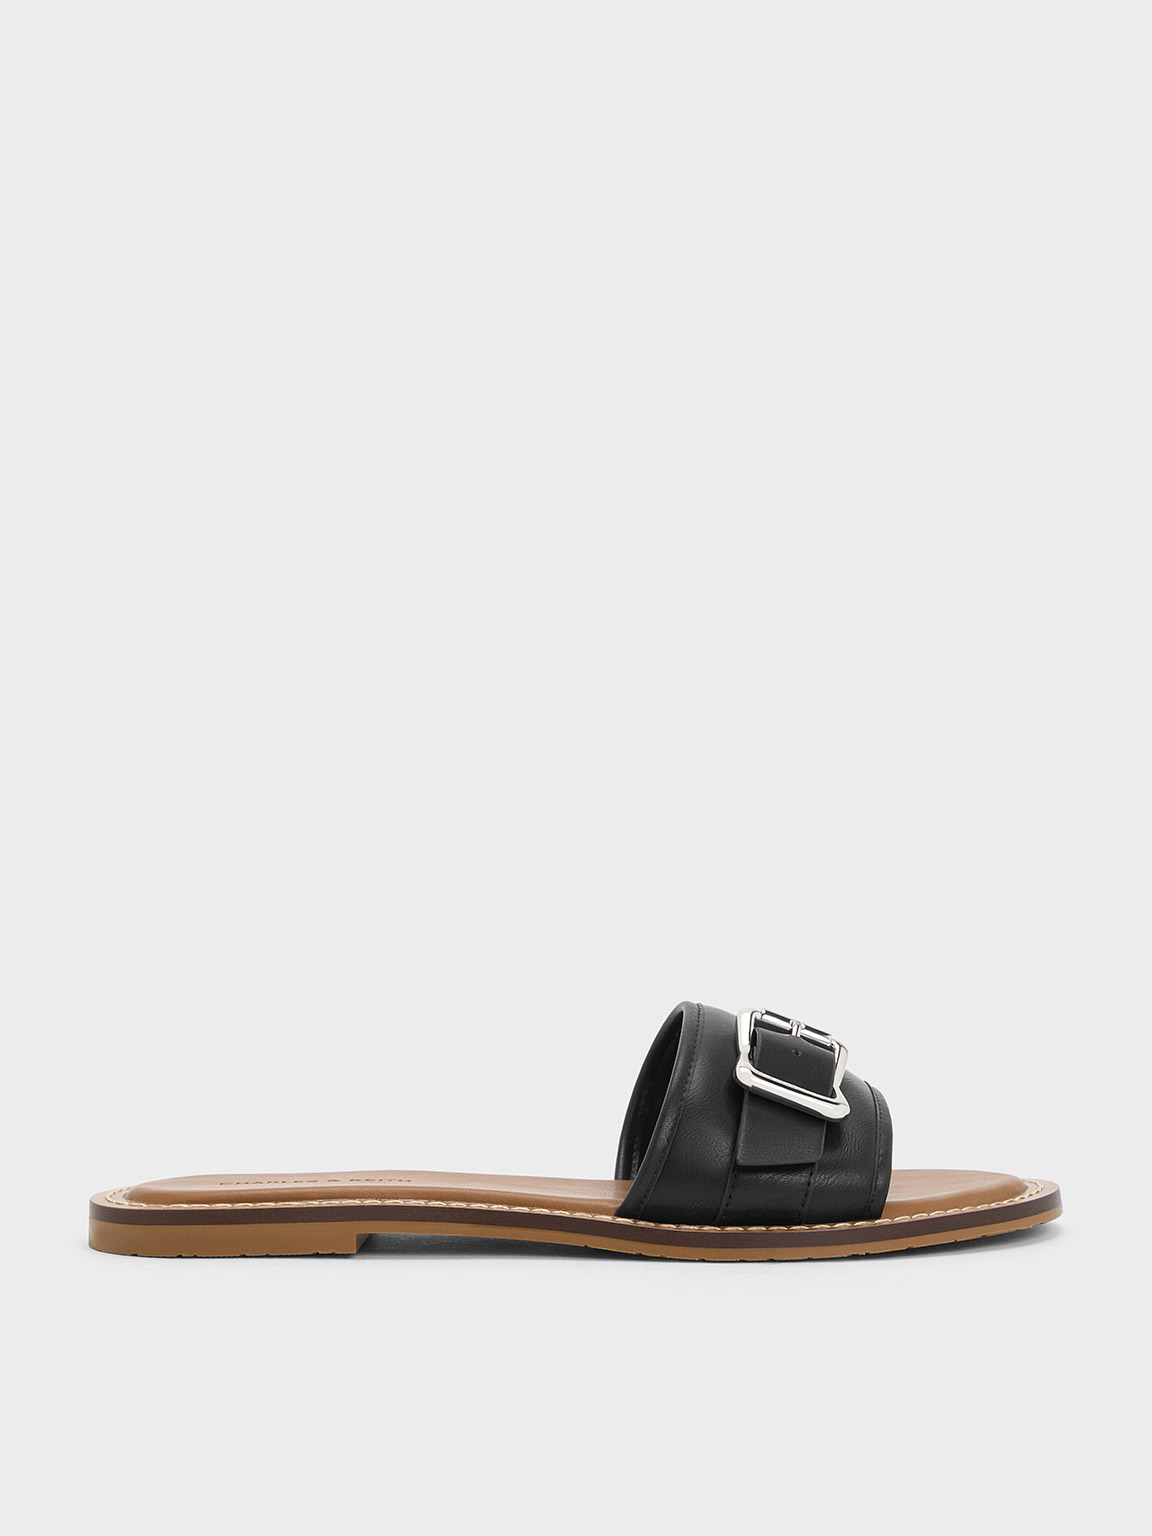 Black Buckled Slide Sandals - CHARLES & KEITH AW